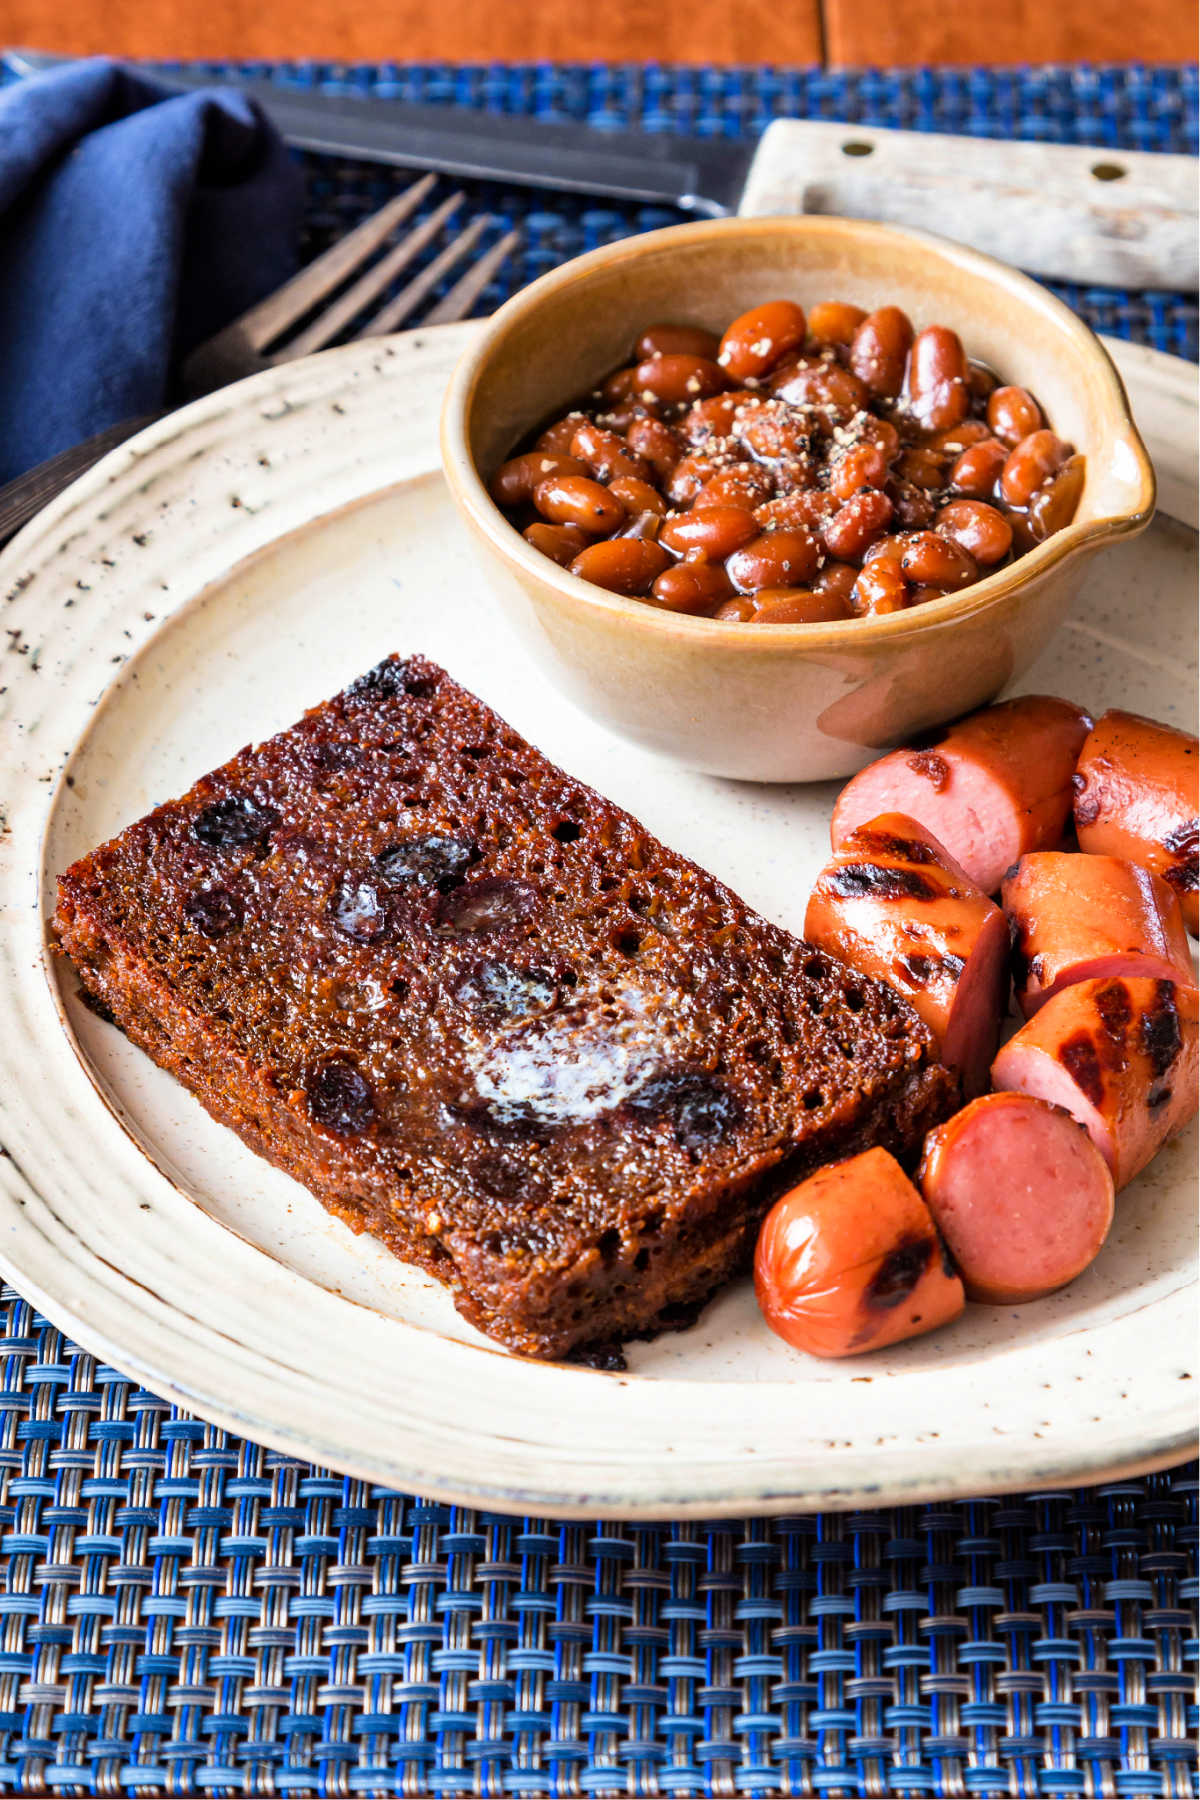 A slice of butter-fried Boston brown bread, grilled sliced franks, and a bowl of beans on a plate.